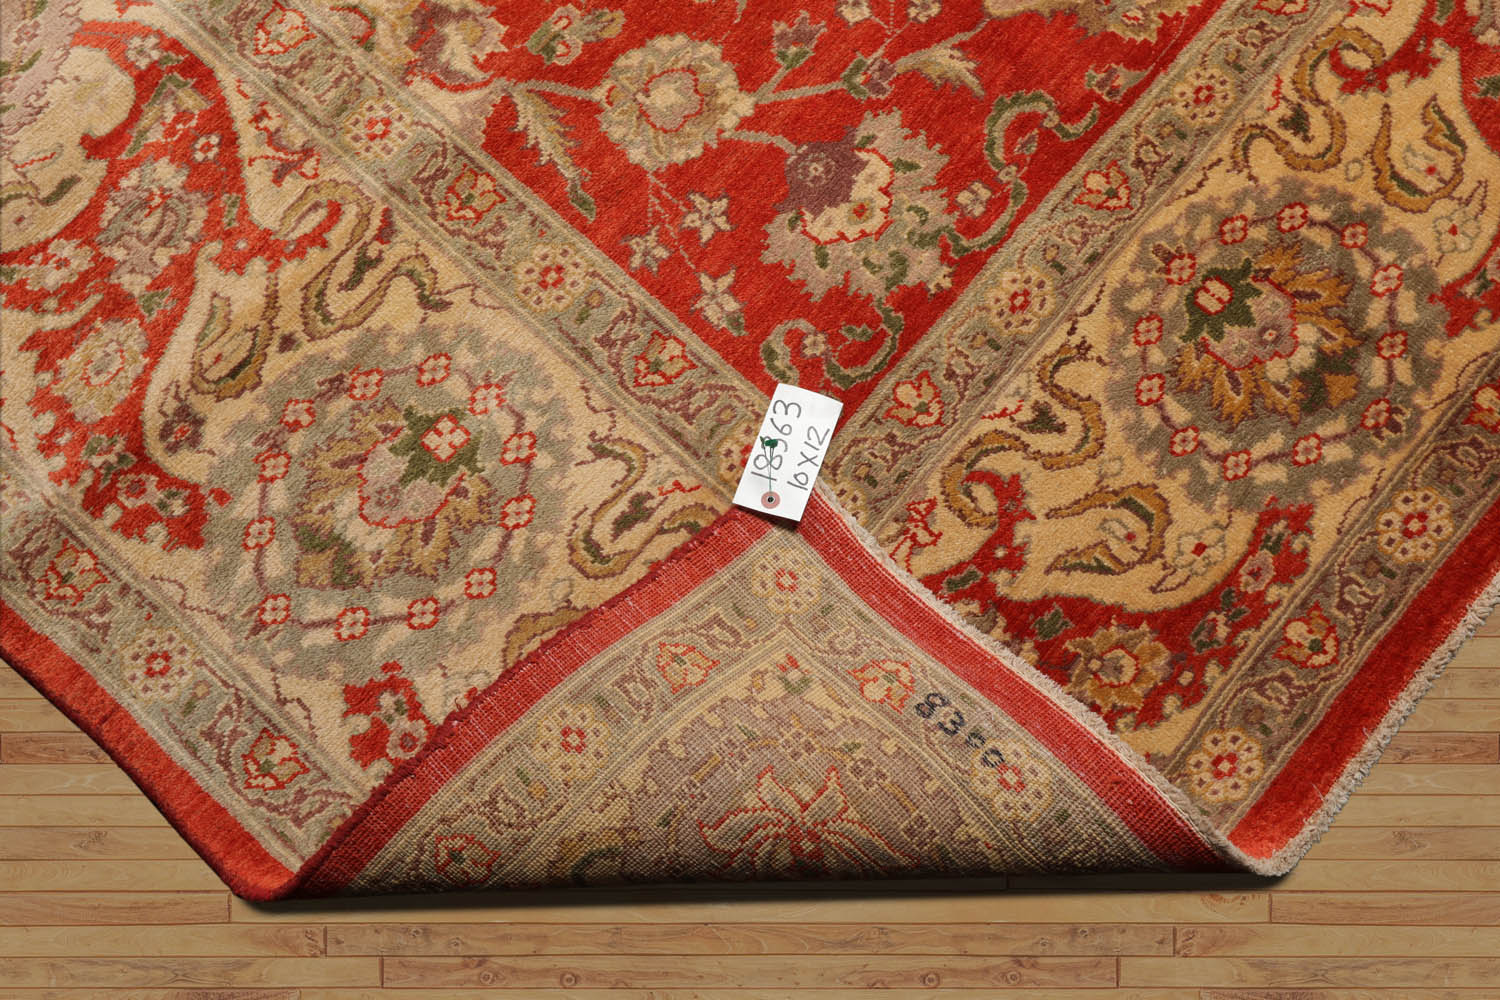 Elsmere 9x12 Hand Knotted 100% Wool Peshawar Traditional Oriental Area Rug Coral, Beige Color